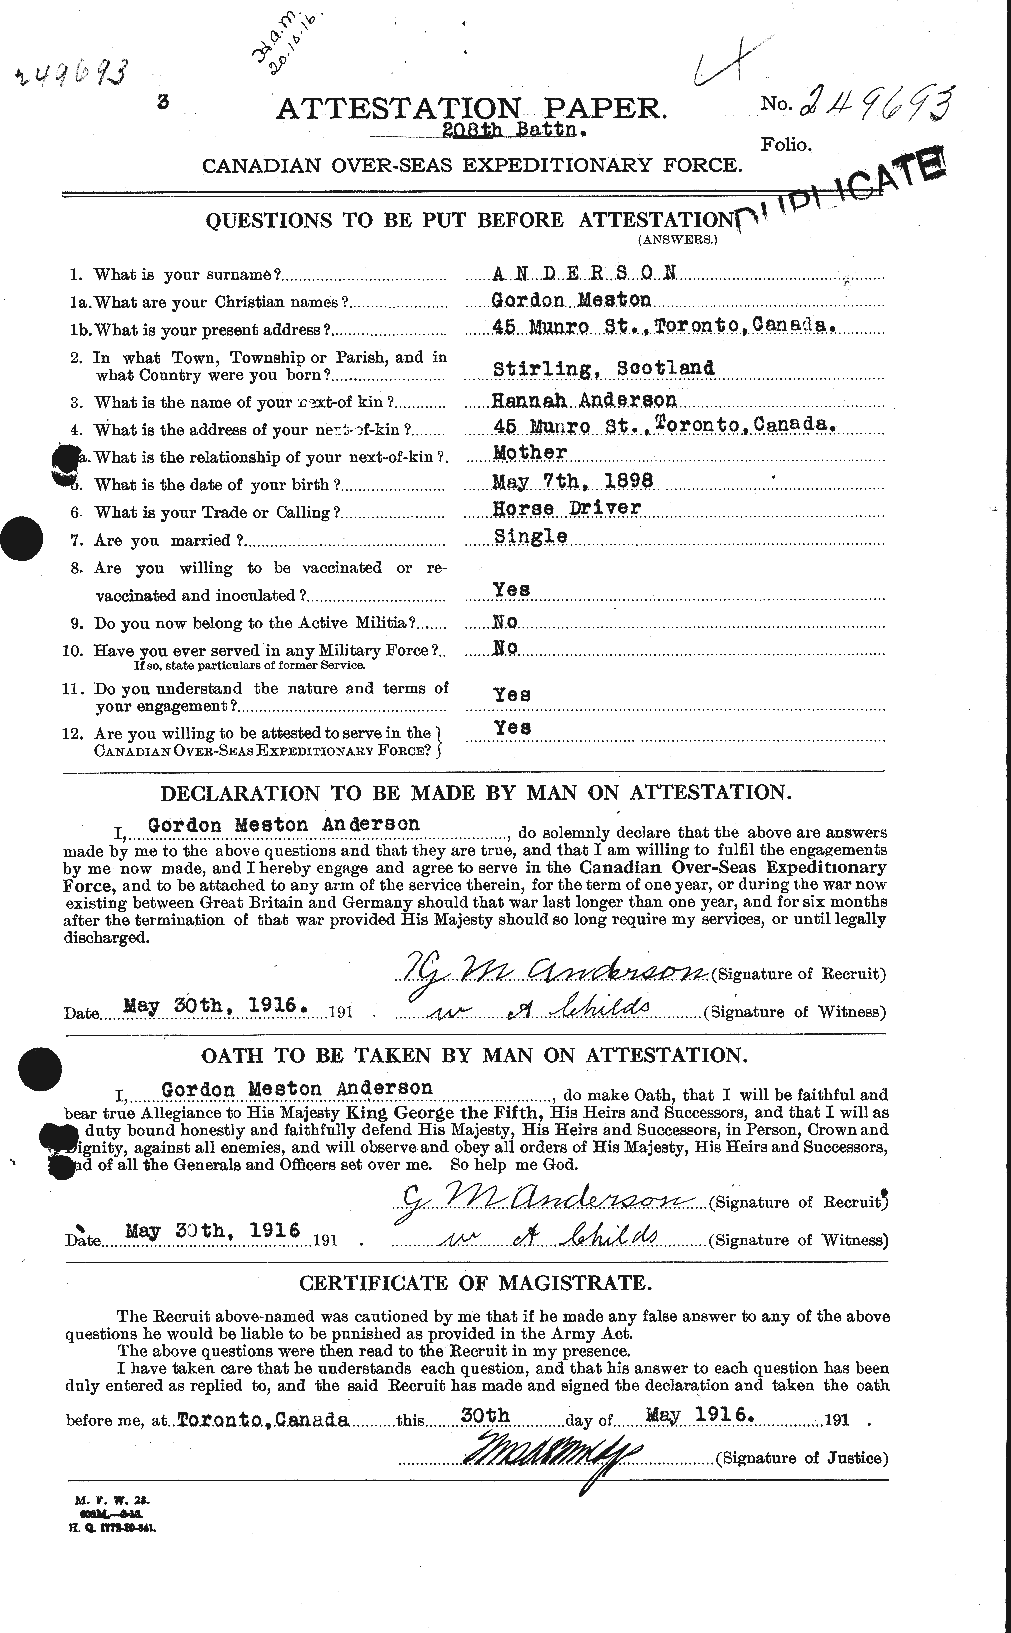 Personnel Records of the First World War - CEF 209664a